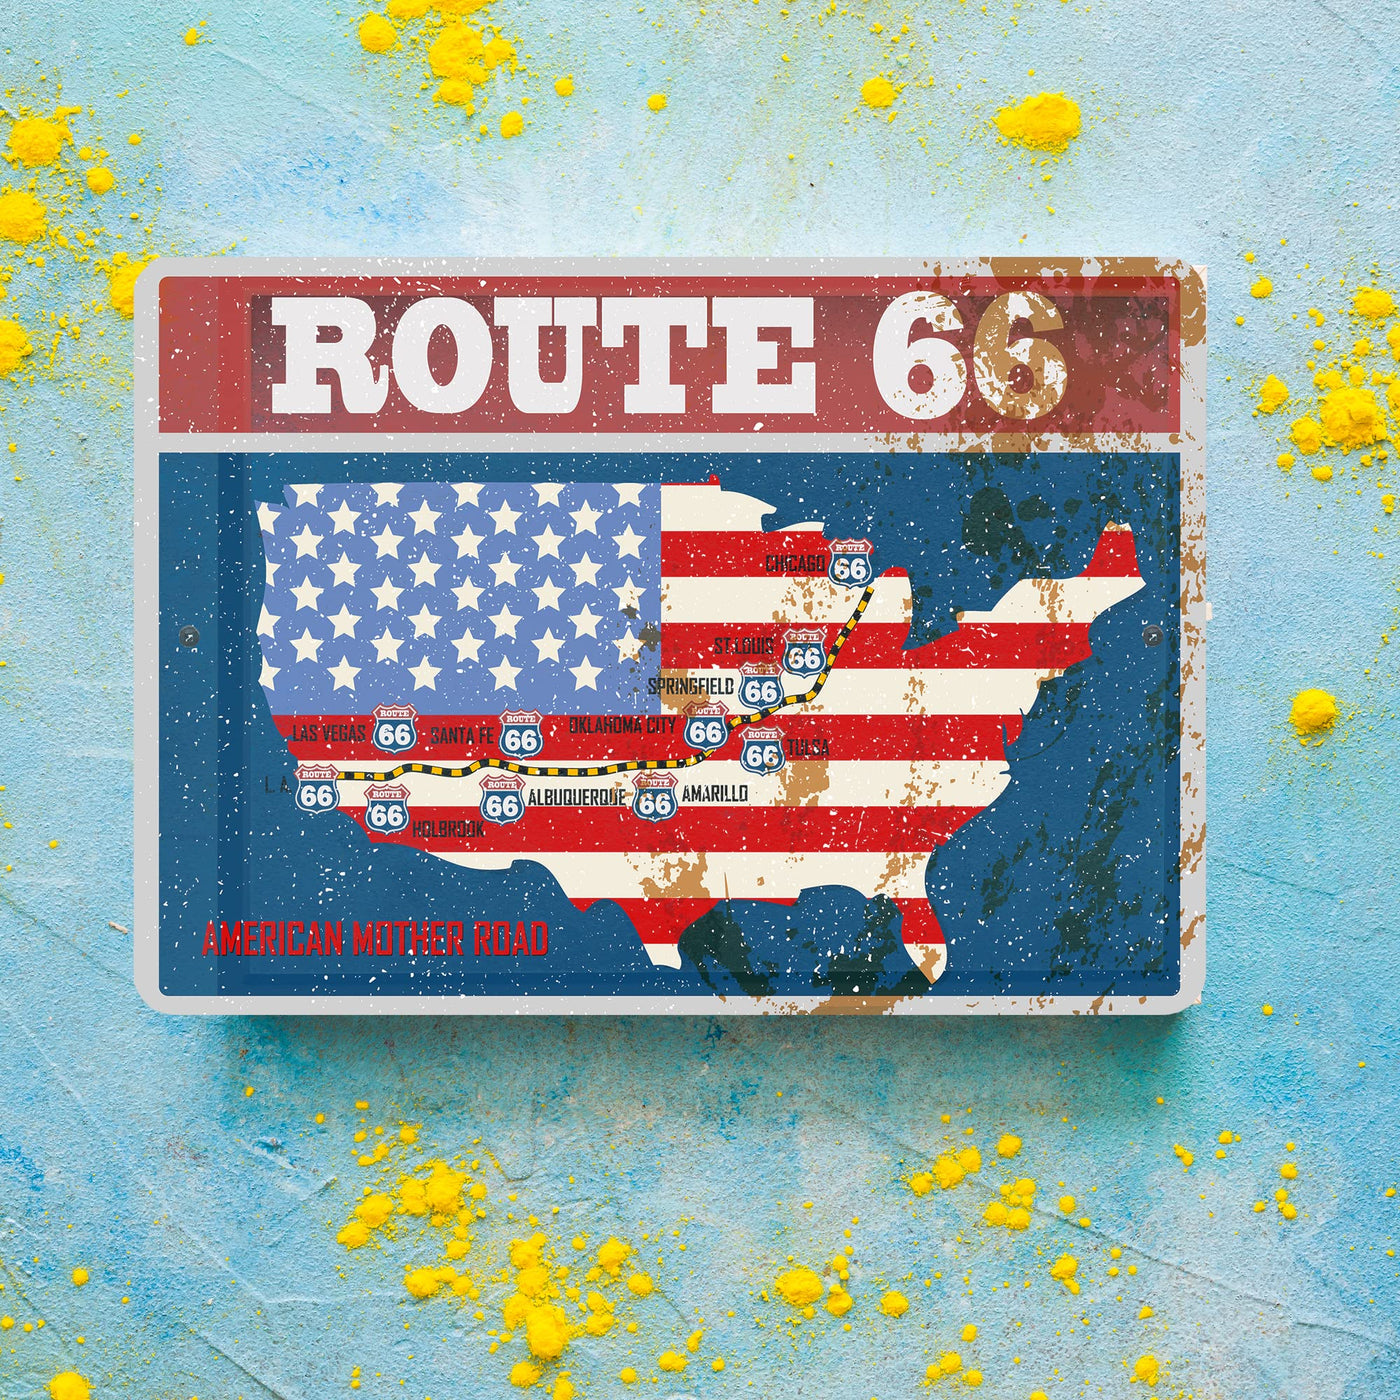 Route 66 Metal Wall Art Vintage Road Sign -12 x 8" Rustic American Flag USA Sign for Garage, Shop, Bar, Man Cave - Retro Tin Sign -Great for Home, Office Decor, Outdoor Accessories & Travel Gifts!